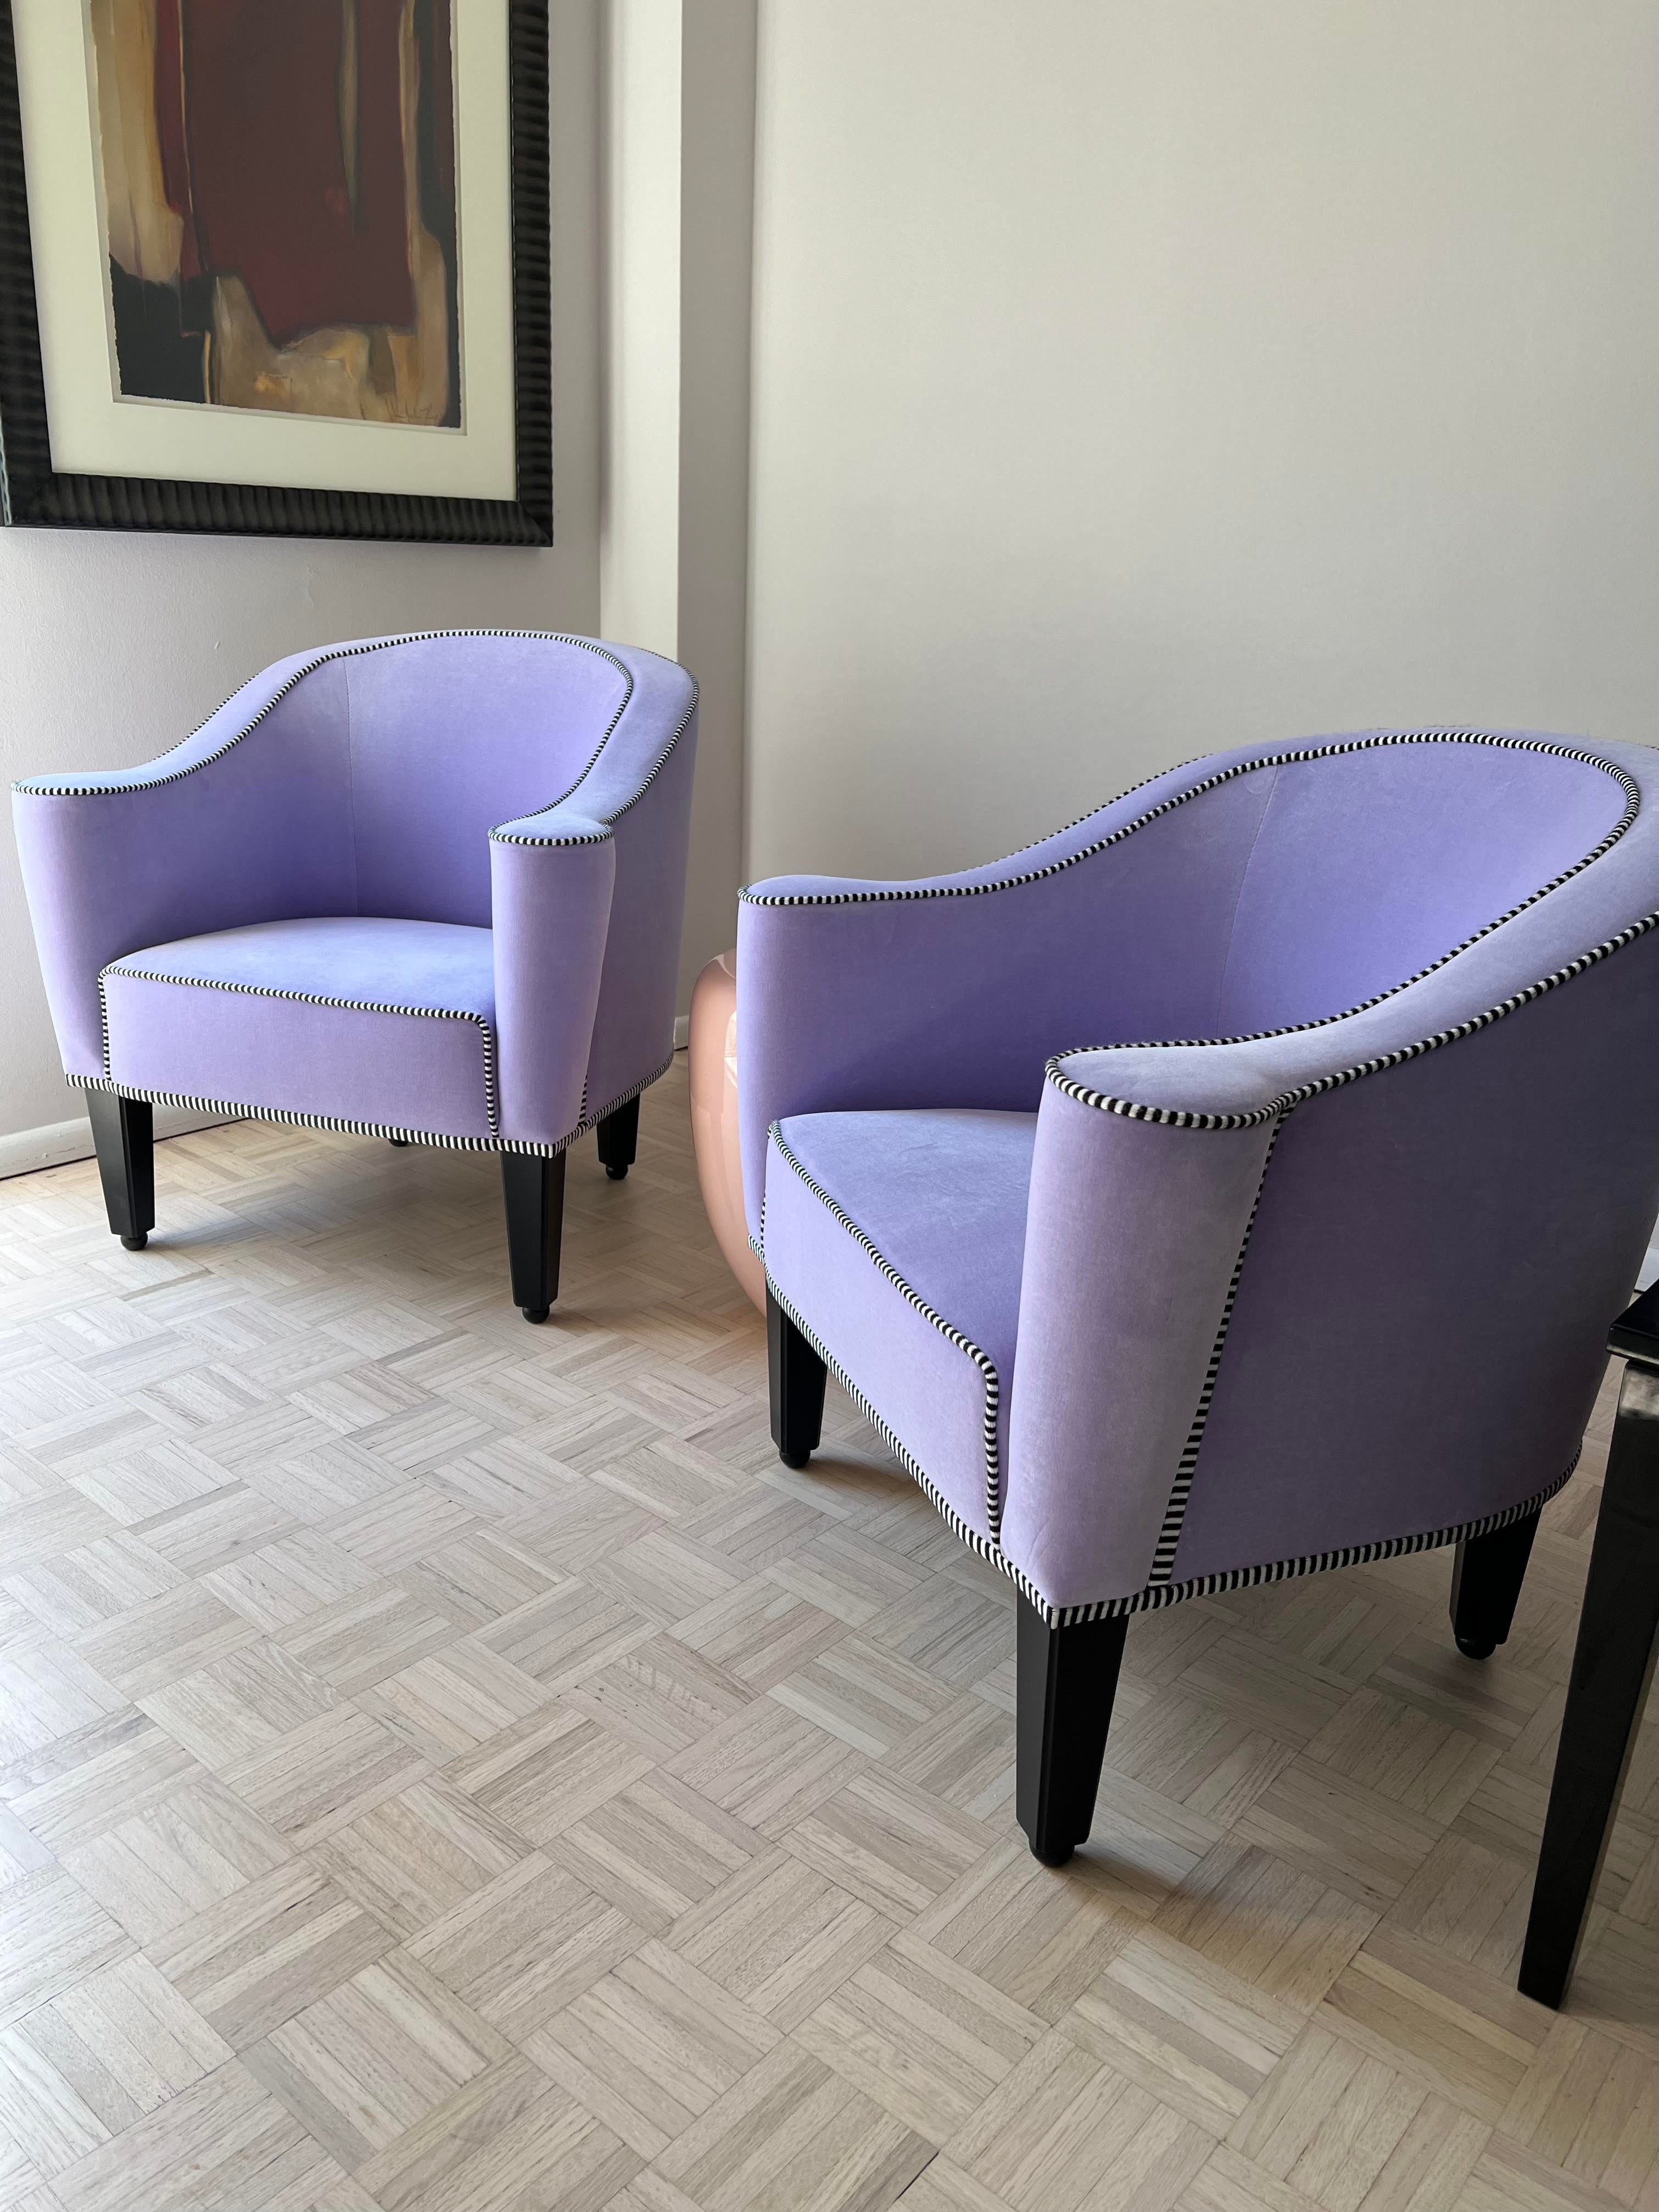 VILLA GALLIA ARMCHAIR
DESIGNED BY JOSEF HOFFMANN
Harold 3 Lilac 632
black/white piping.

Wood frame
fabric damaged in transit, otherwise new chairs.